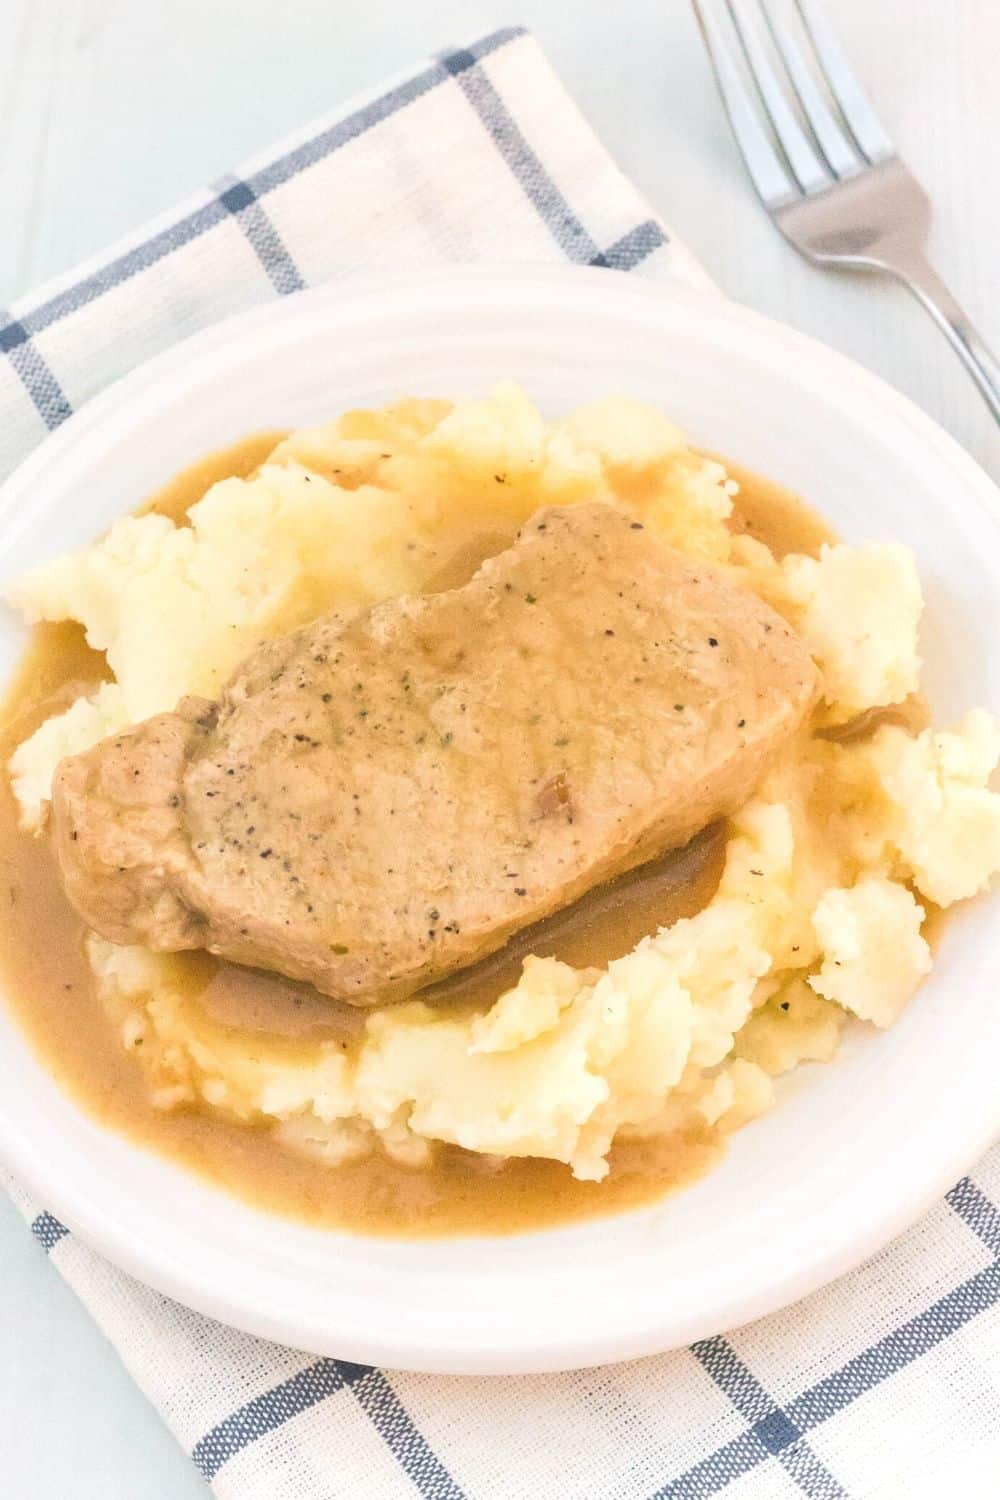 a whole pork chop covered with gravy and served over mashed potatoes on a white plate